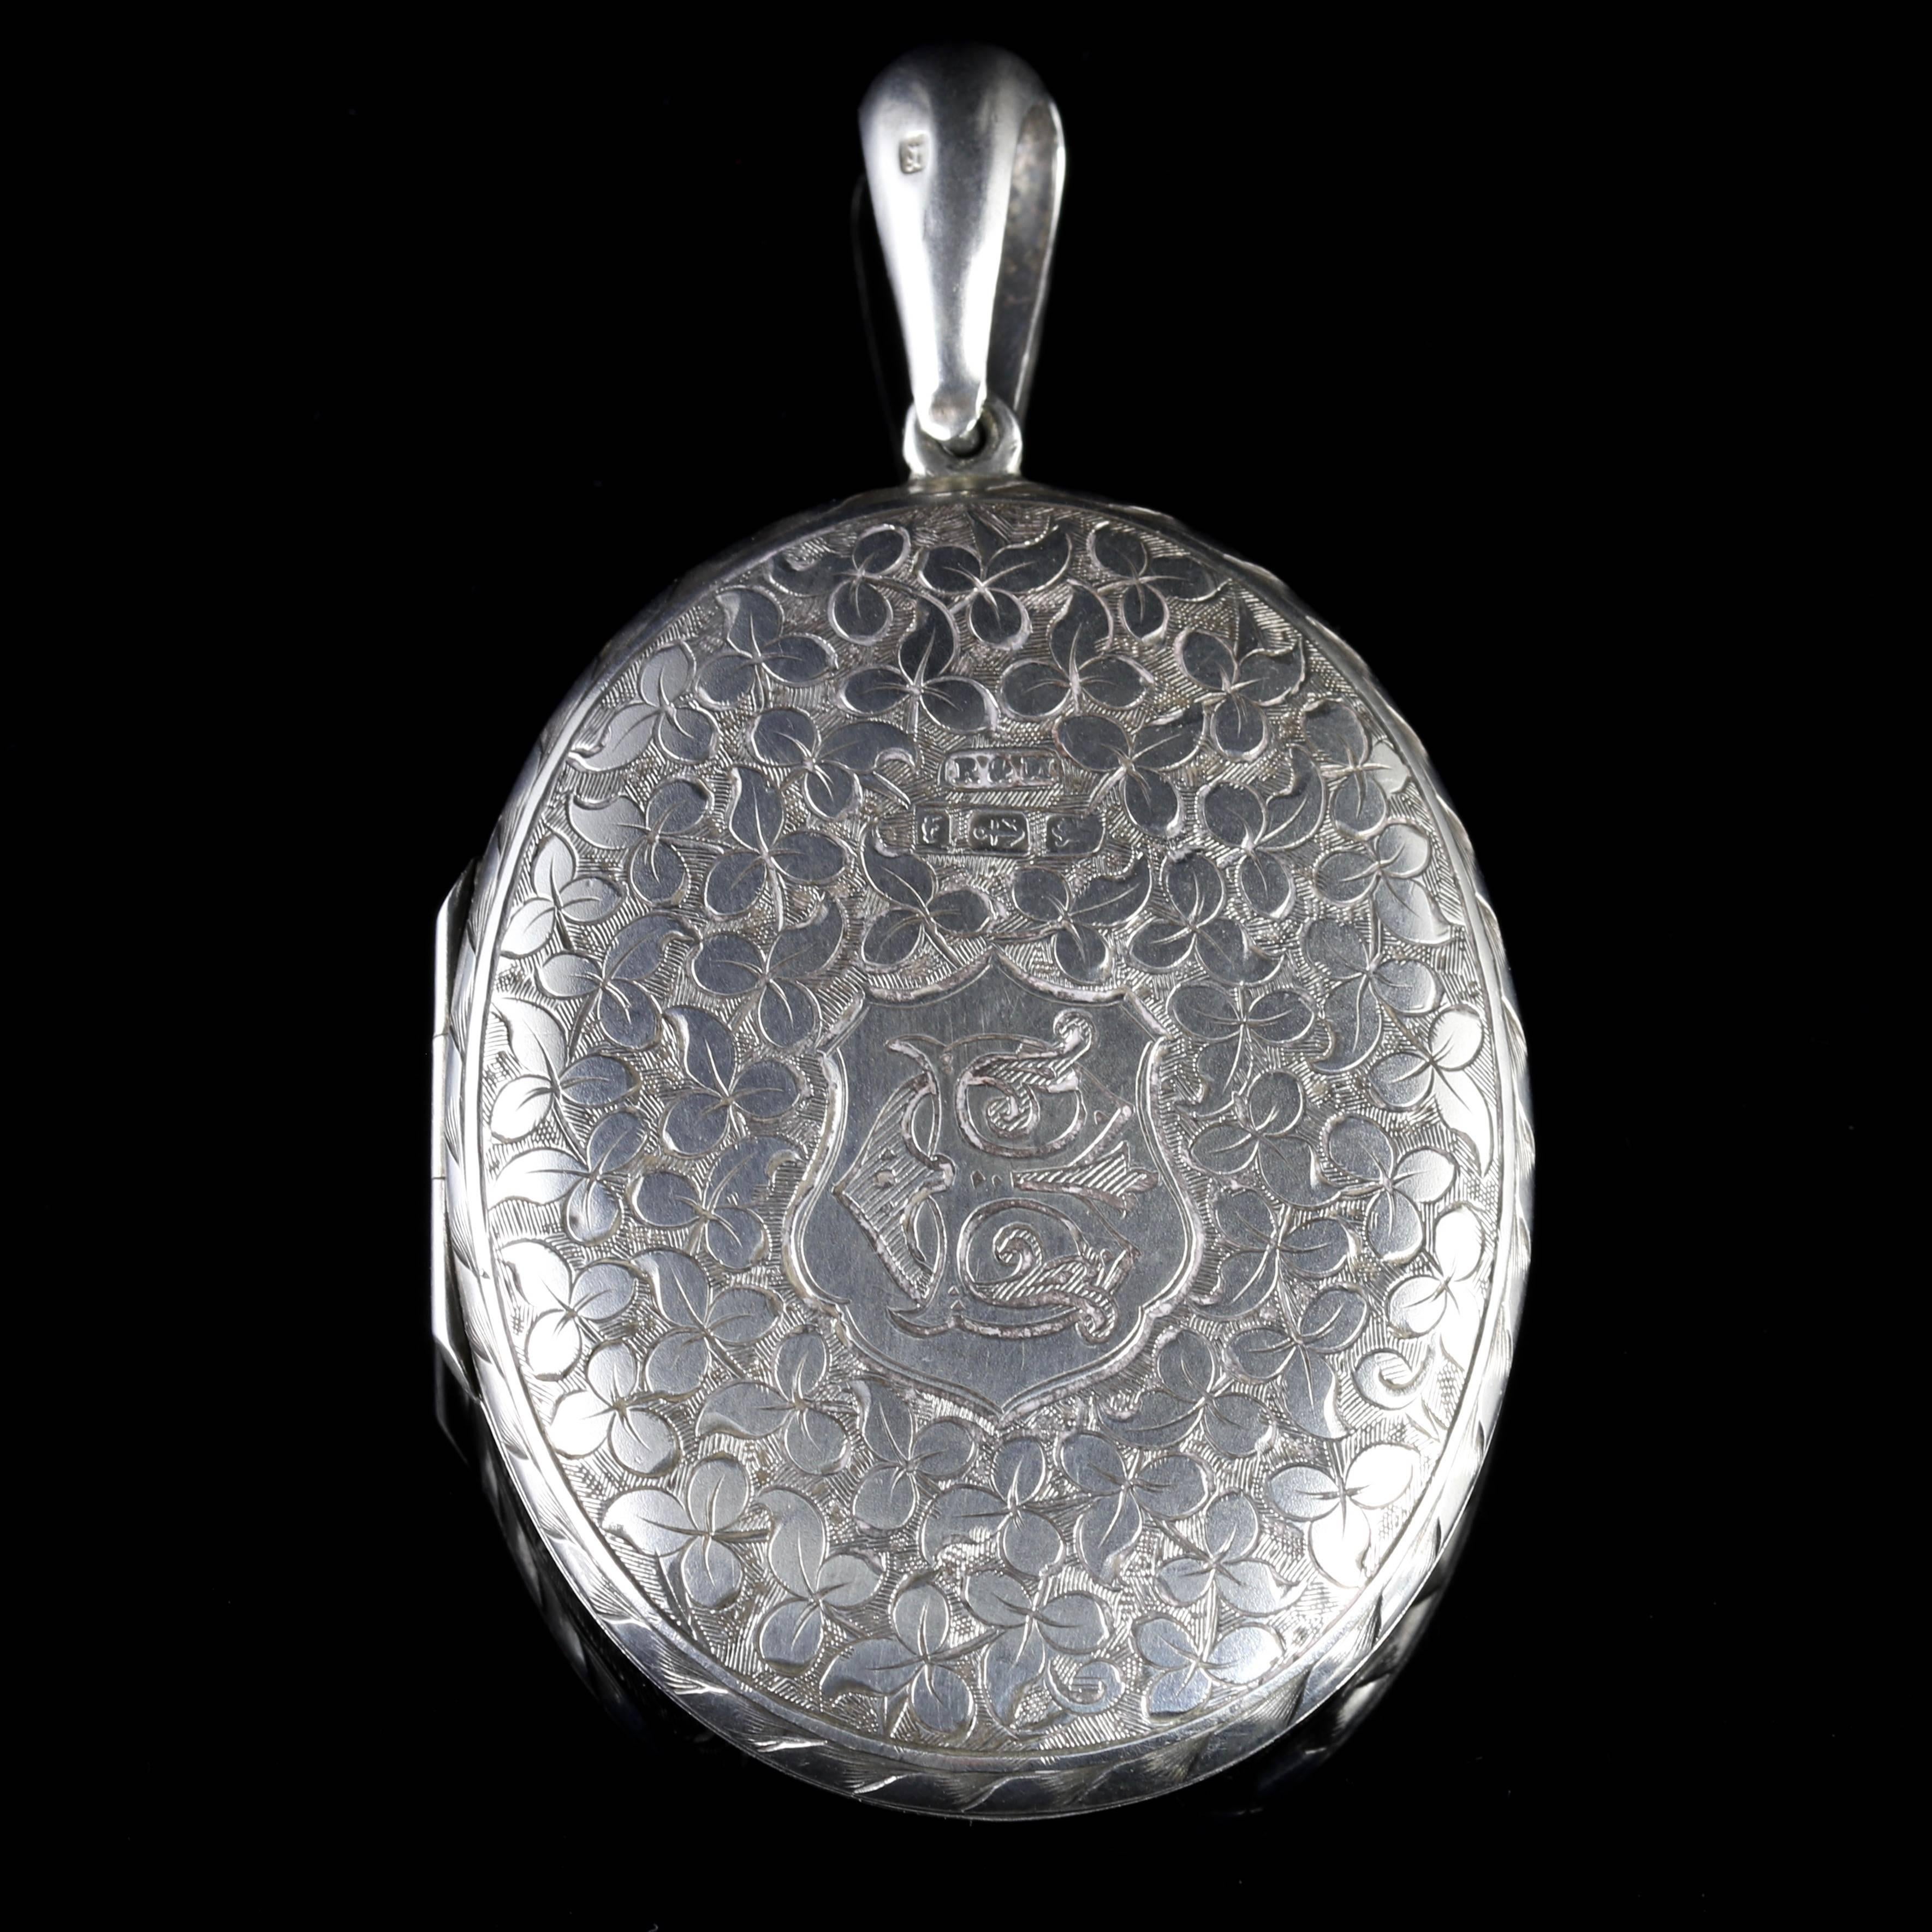 This fabulous Sterling Silver fully engraved large locket is genuine Victorian, Circa 1880.

The front of the locket displays fabulous workmanship.

Ivy can be seen around the outer panels of the locket.

Ivy is a symbol of - I cling to thee - a